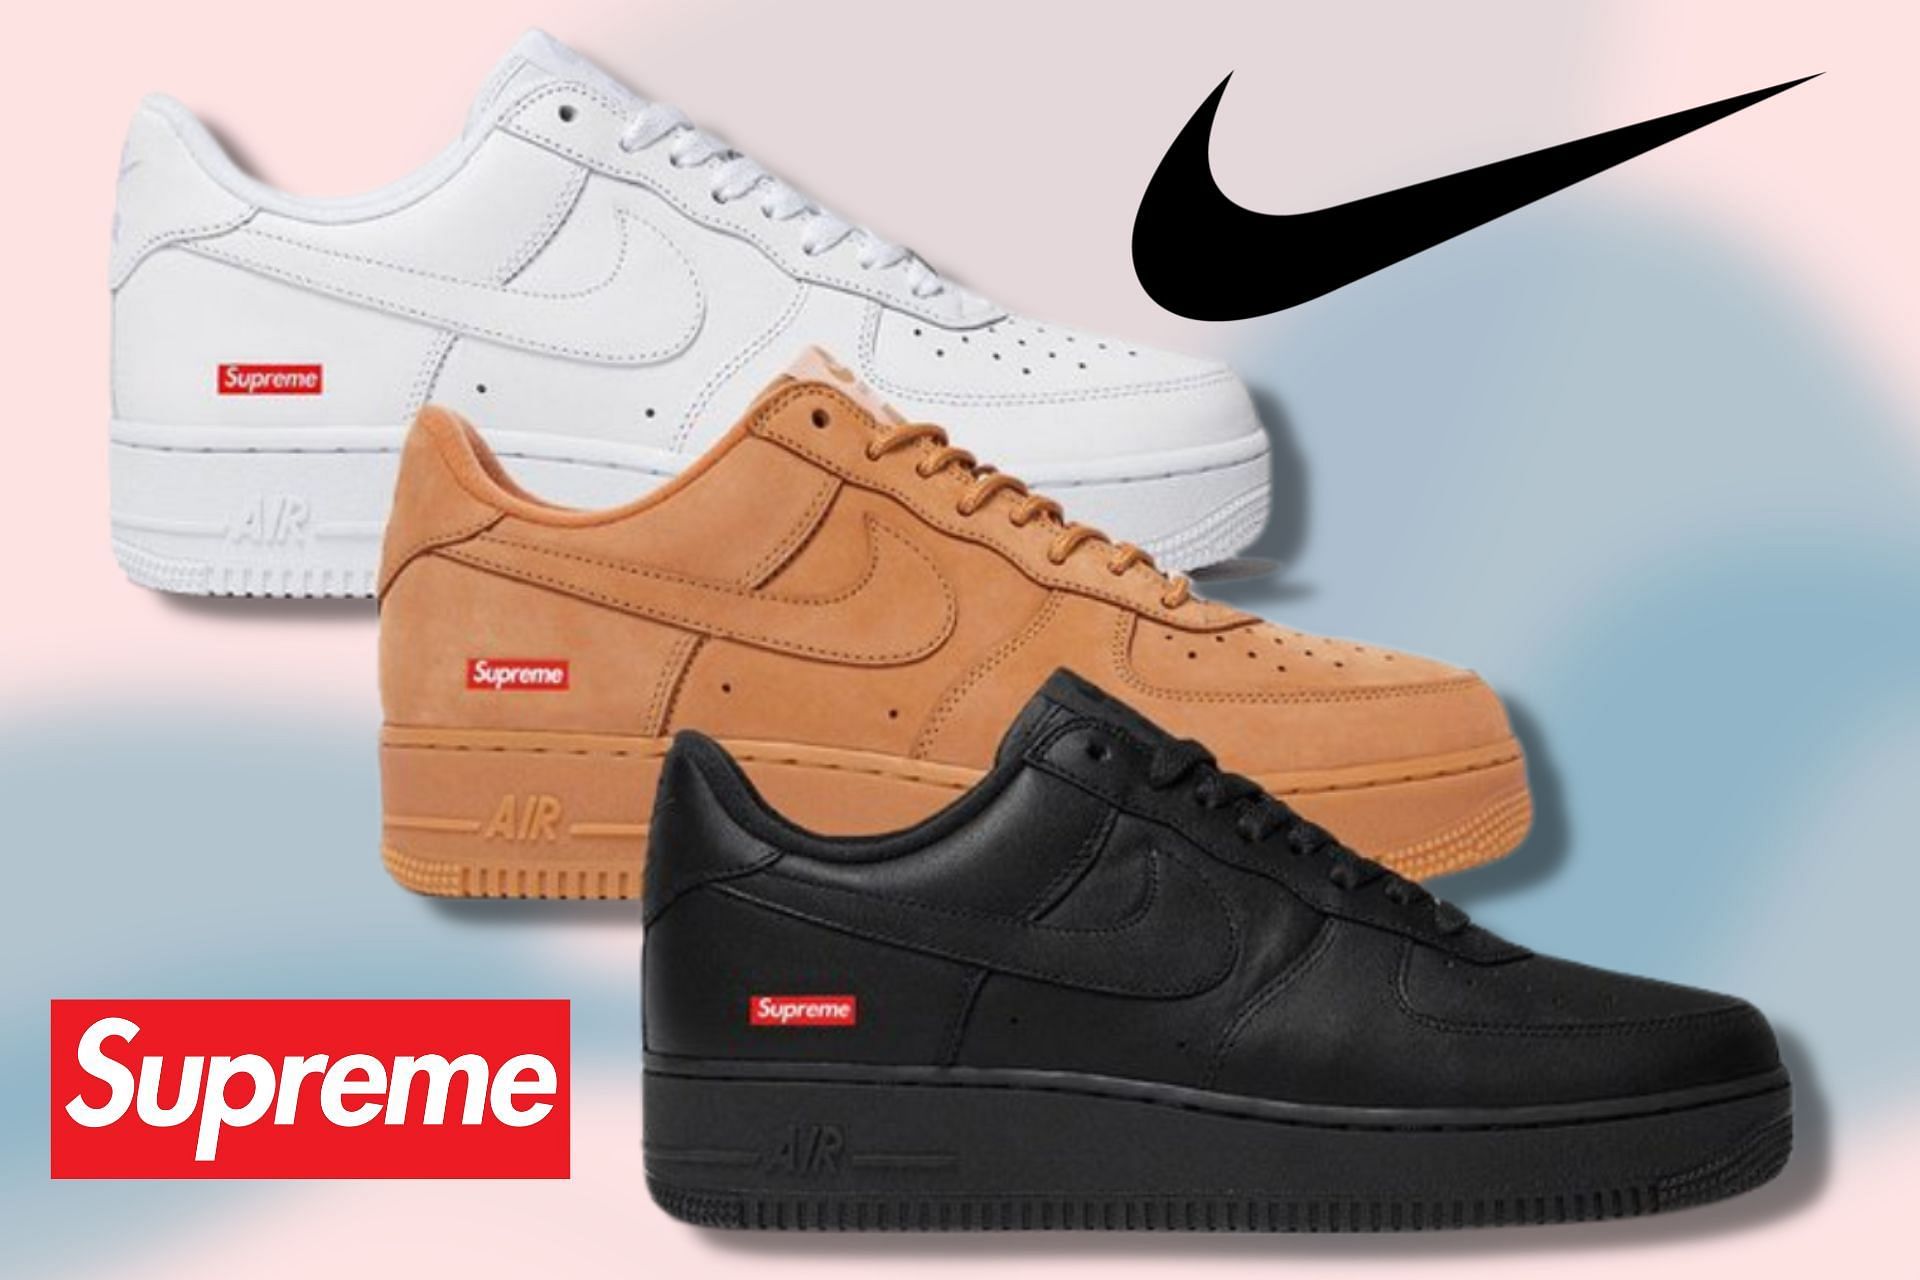 Where to buy Supreme x Nike Air Force 1 Low footwear pack? Price